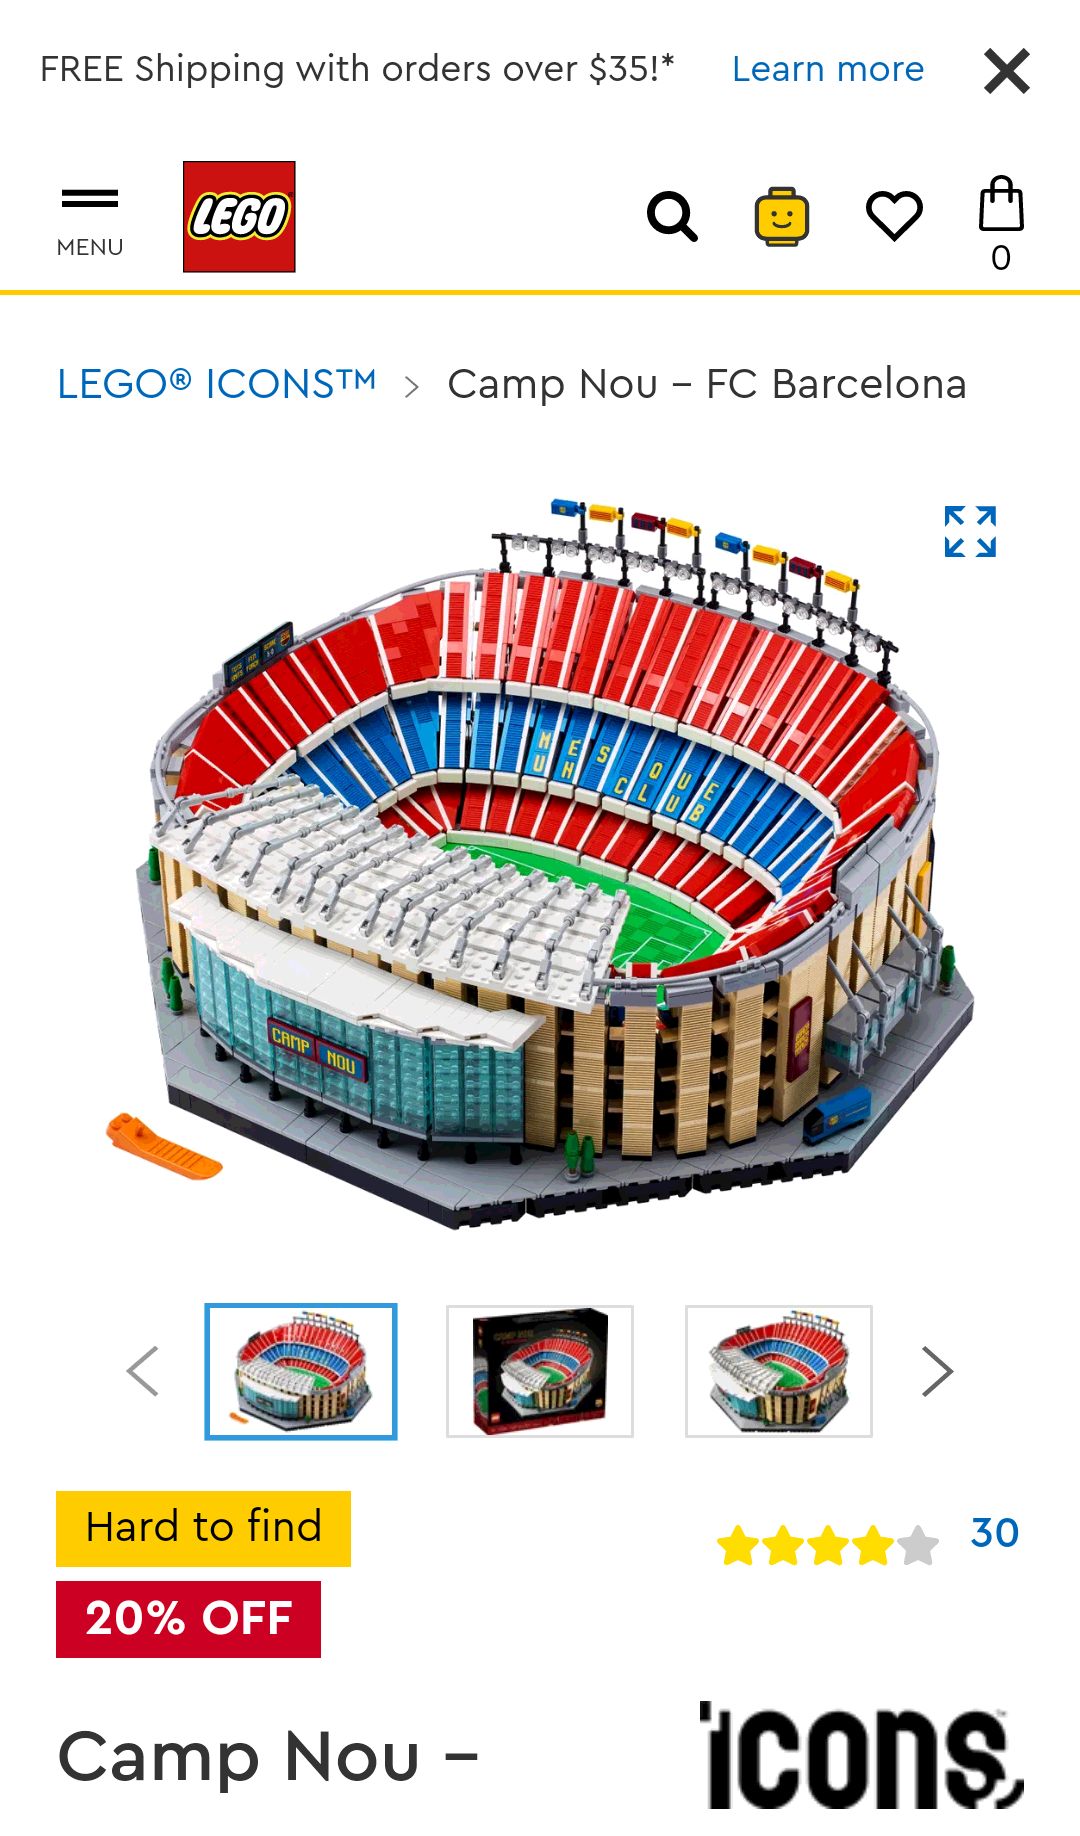 Camp Nou – FC Barcelona 10284 | LEGO® ICONS™ | Buy online at the Official LEGO® Shop US